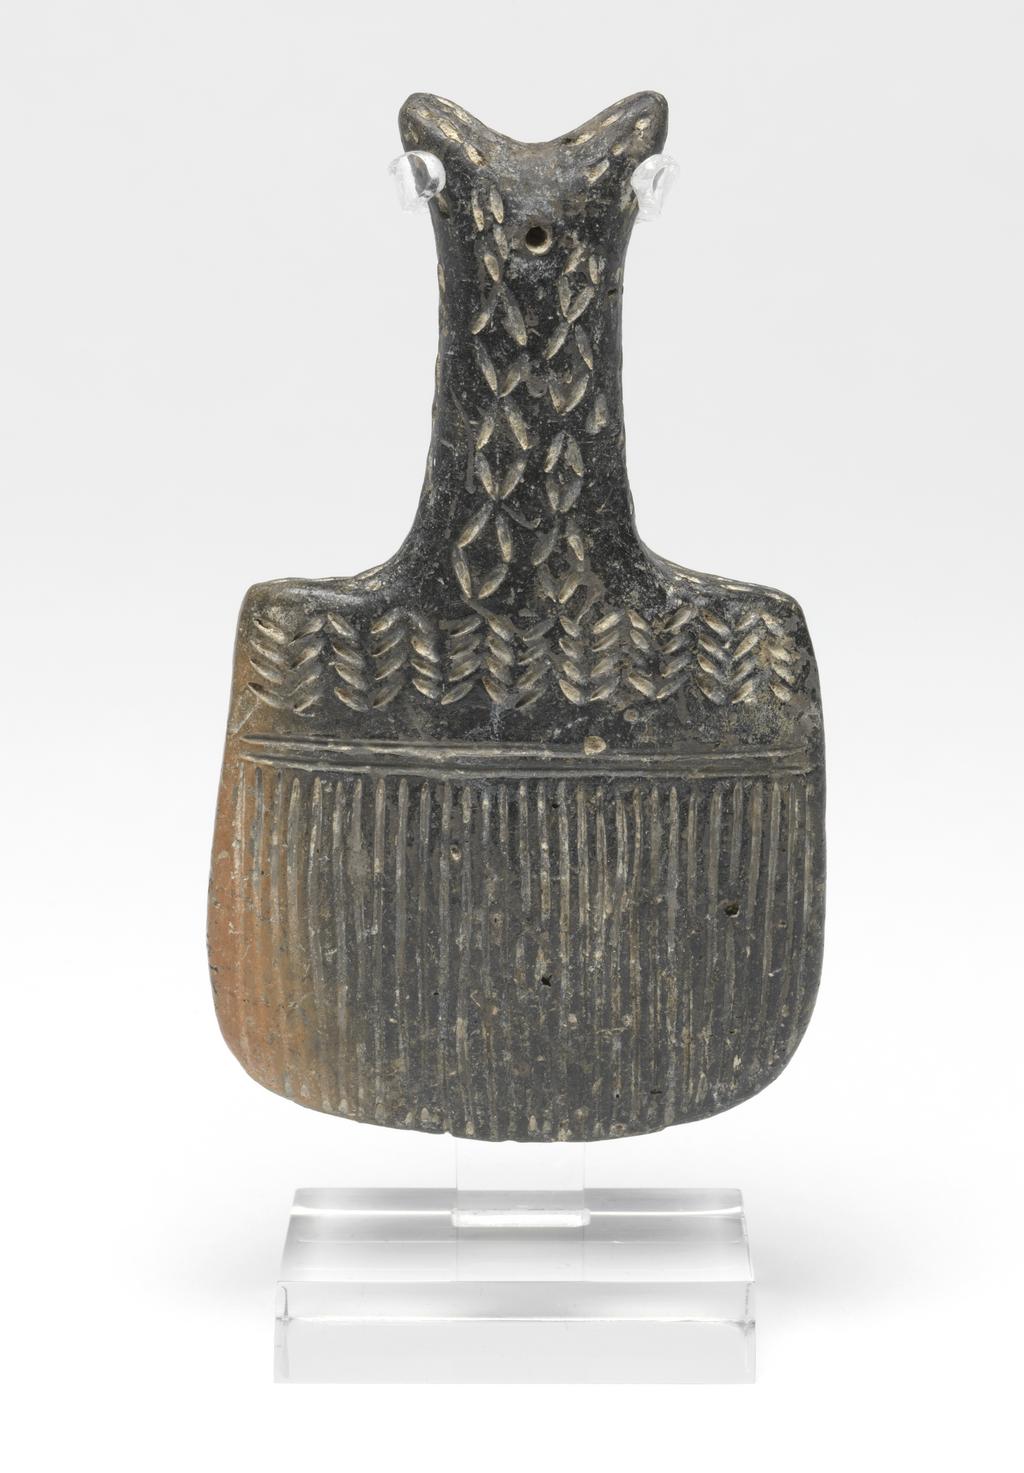 An image of Model of brush. Production Place: Cyprus. Find Spot: Vounous Cyprus; Tomb 121. Clay, red-polished ware, depth 0.012 m, height 0.099 m, width 0.058 m, 2200 to 2101 B.C. Early Cypriot II. Bronze Age.